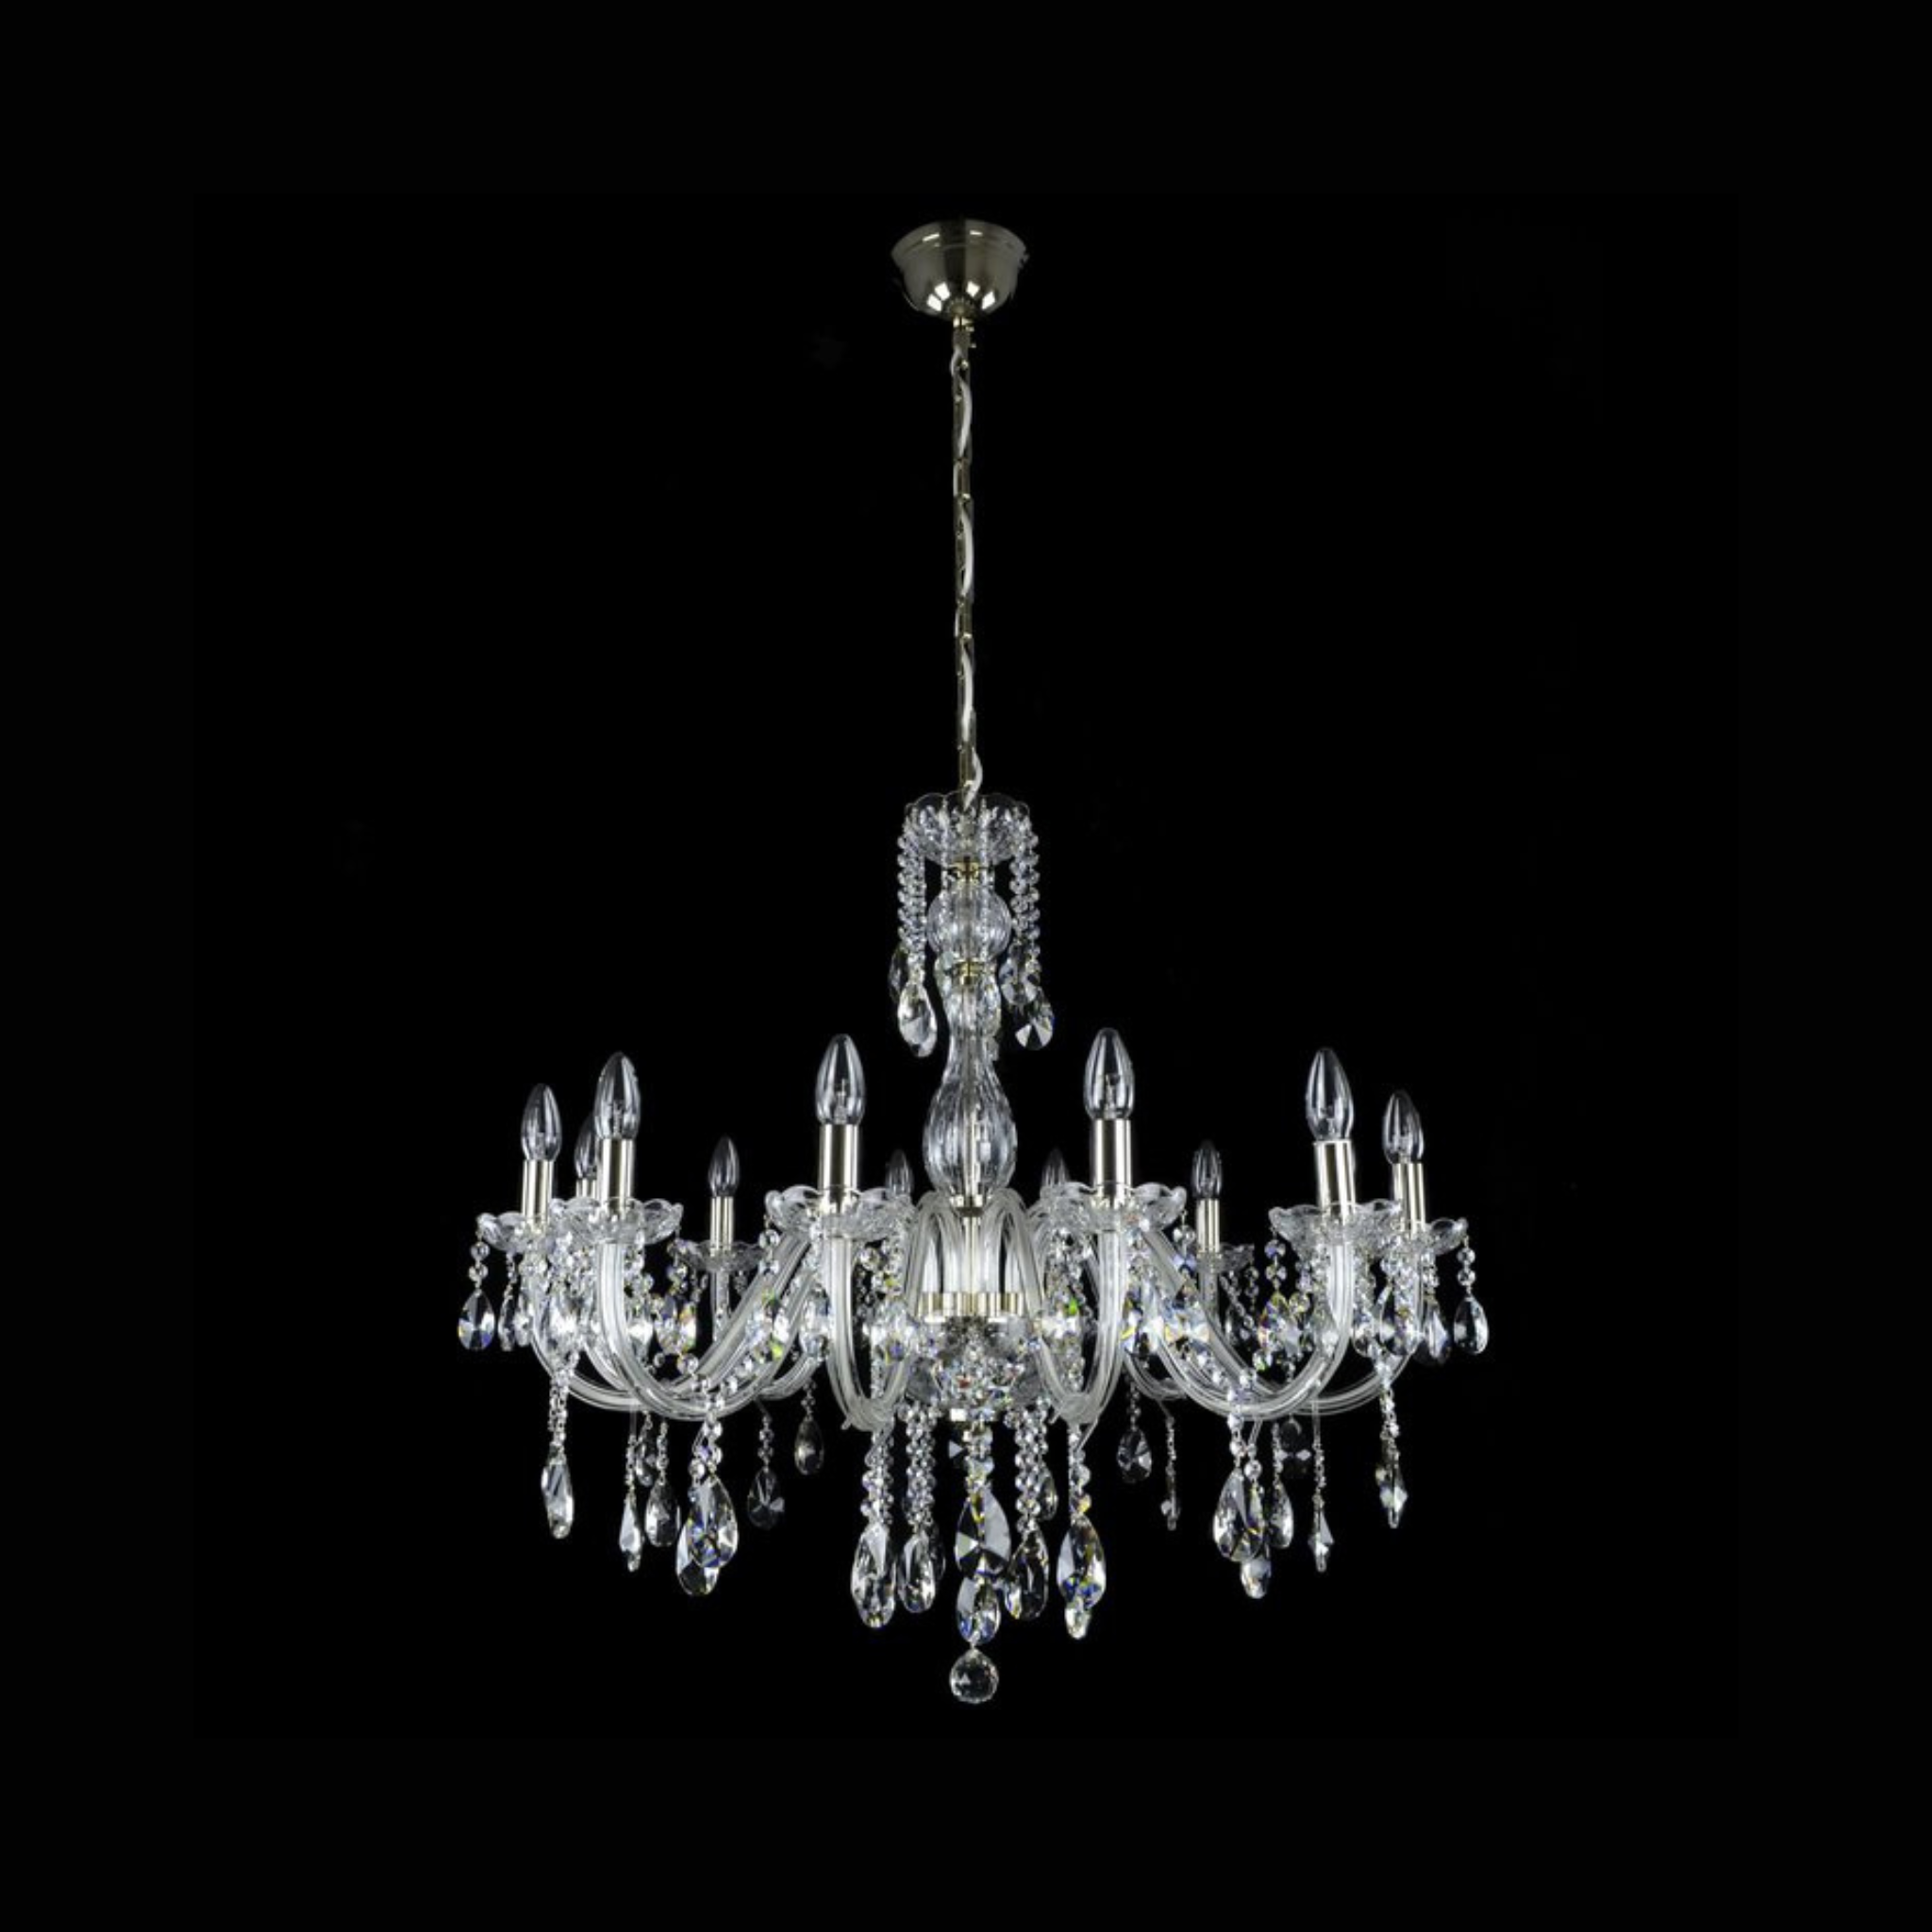 Clarit 12 Crystal Glass Chandelier - Wranovsky - Luxury Lighting Boutique